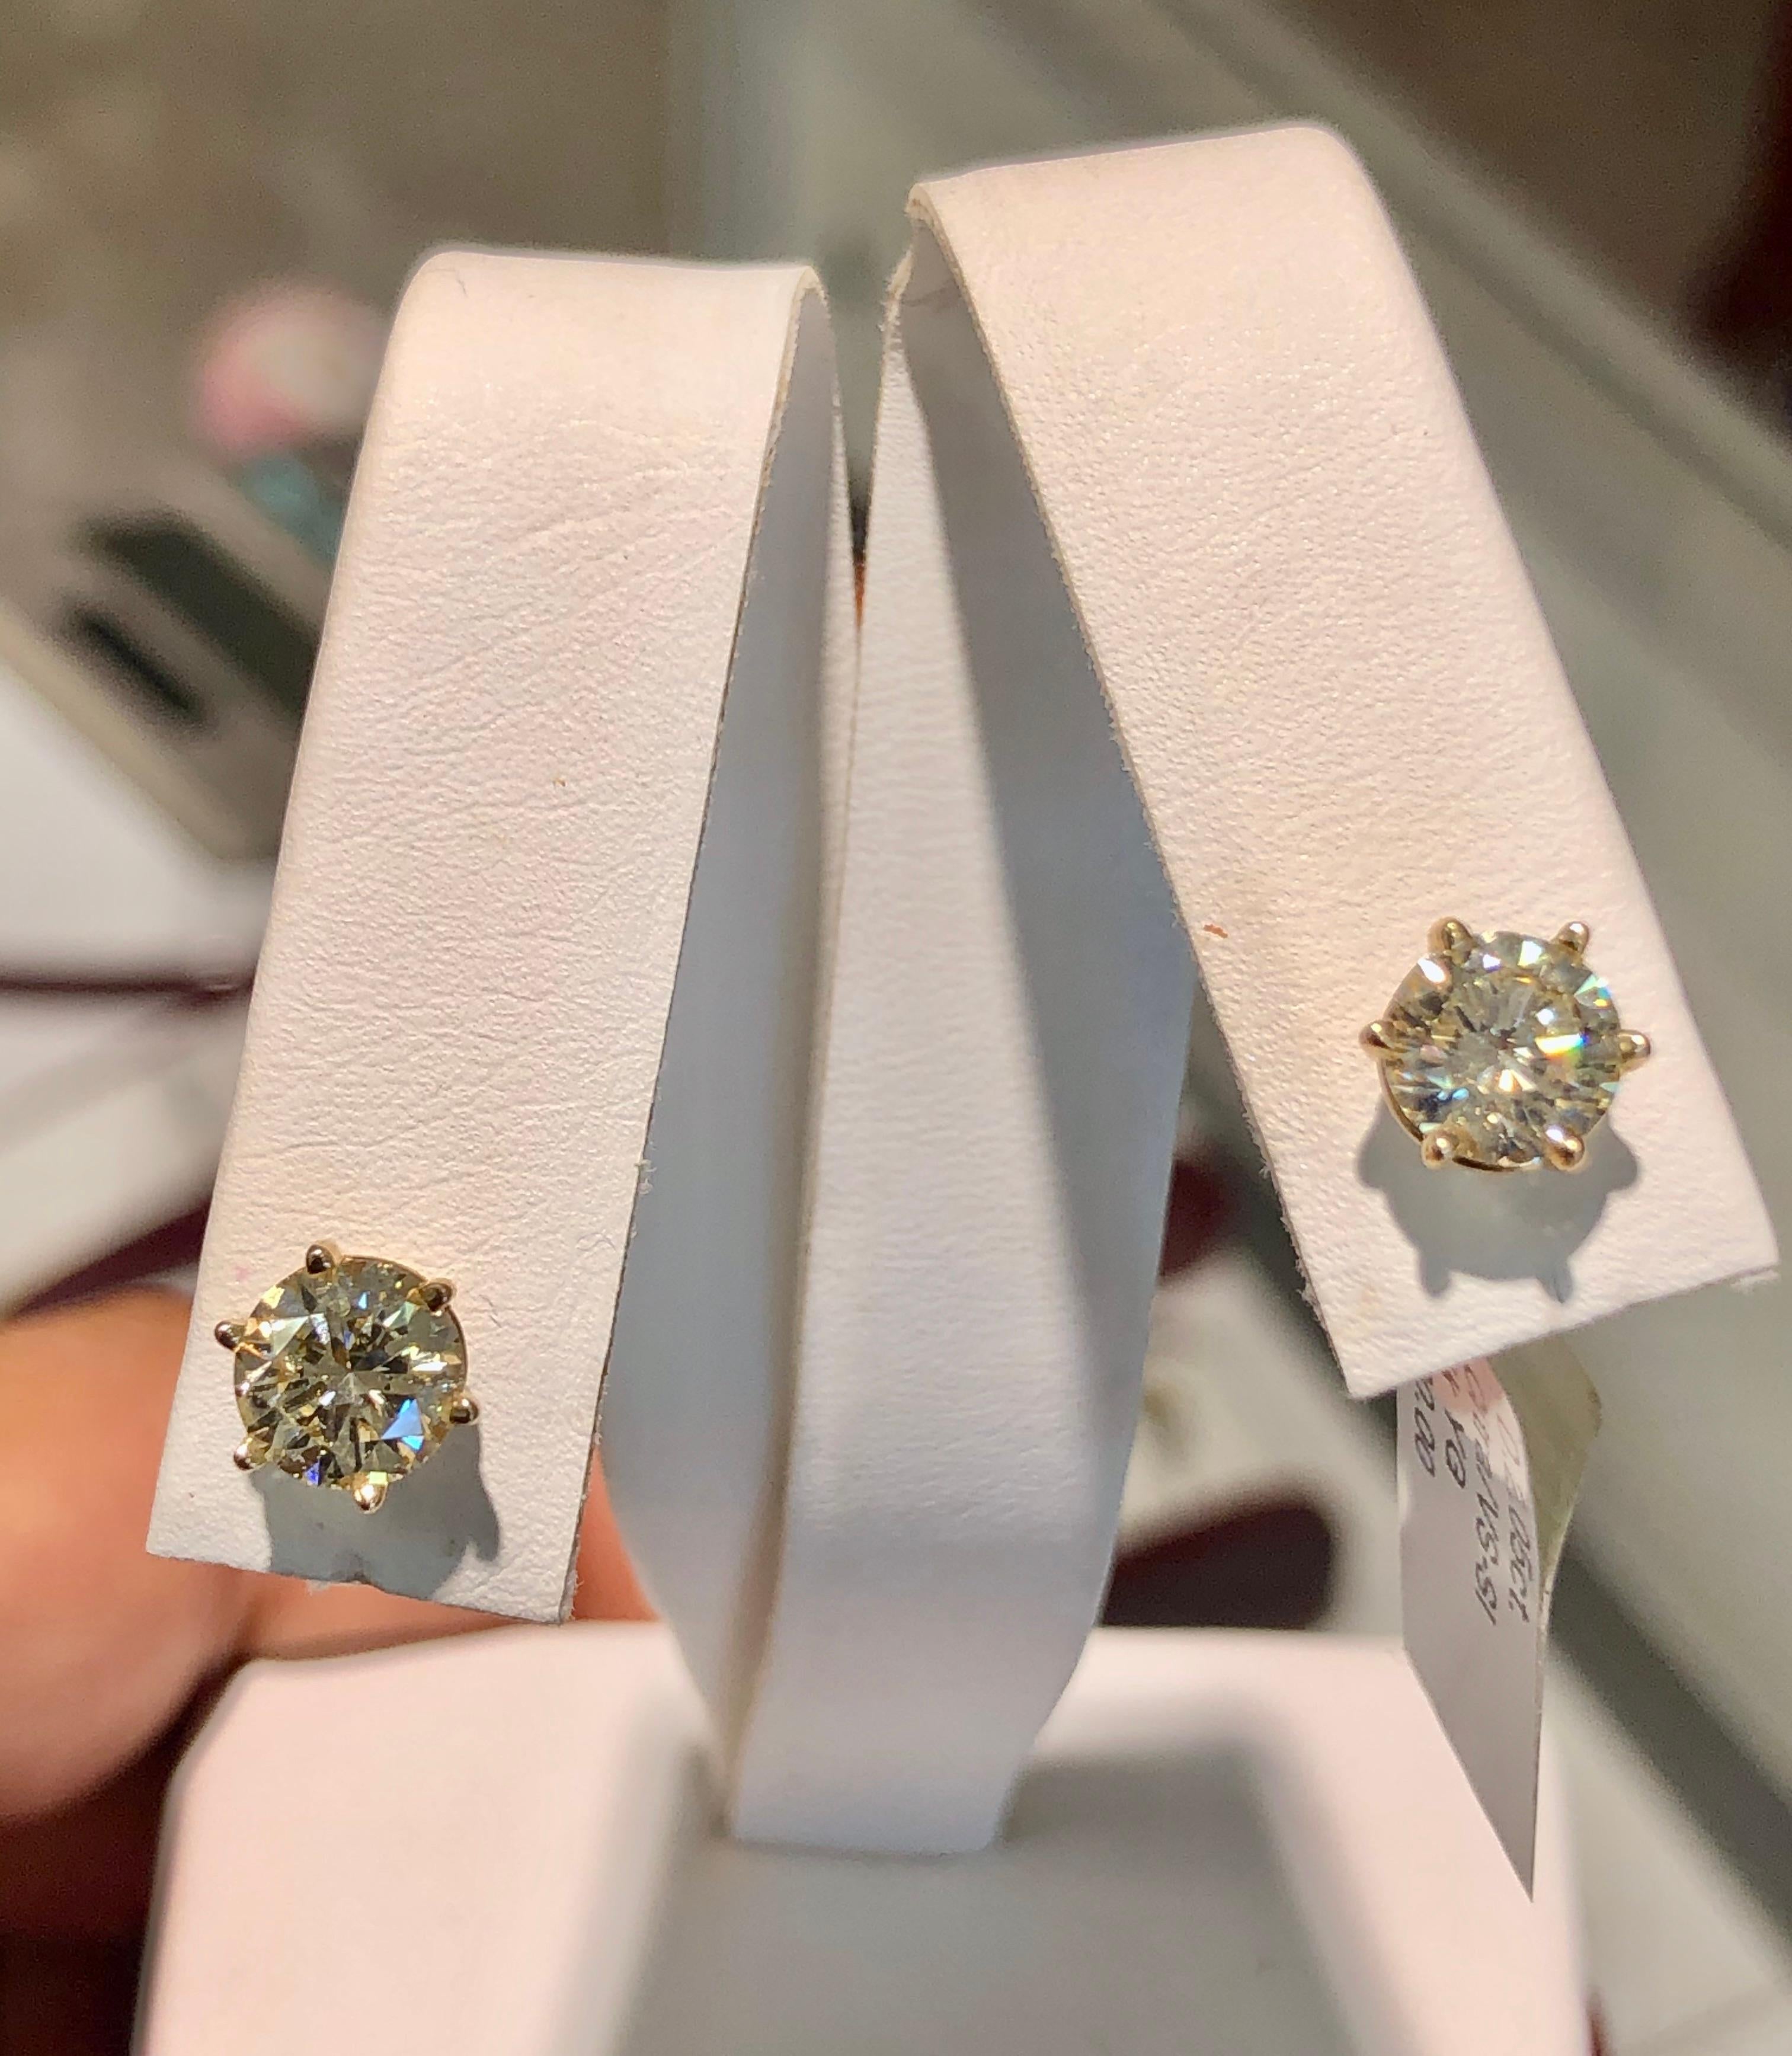 These diamond stud earrings feature two matching perfectly natural diamonds total weight 2.05 carat, color M, clarity VS2-SI1 round brilliant cut. Each stone is six-claw-set in an open-back setting 14 yellow gold.
New Condition
